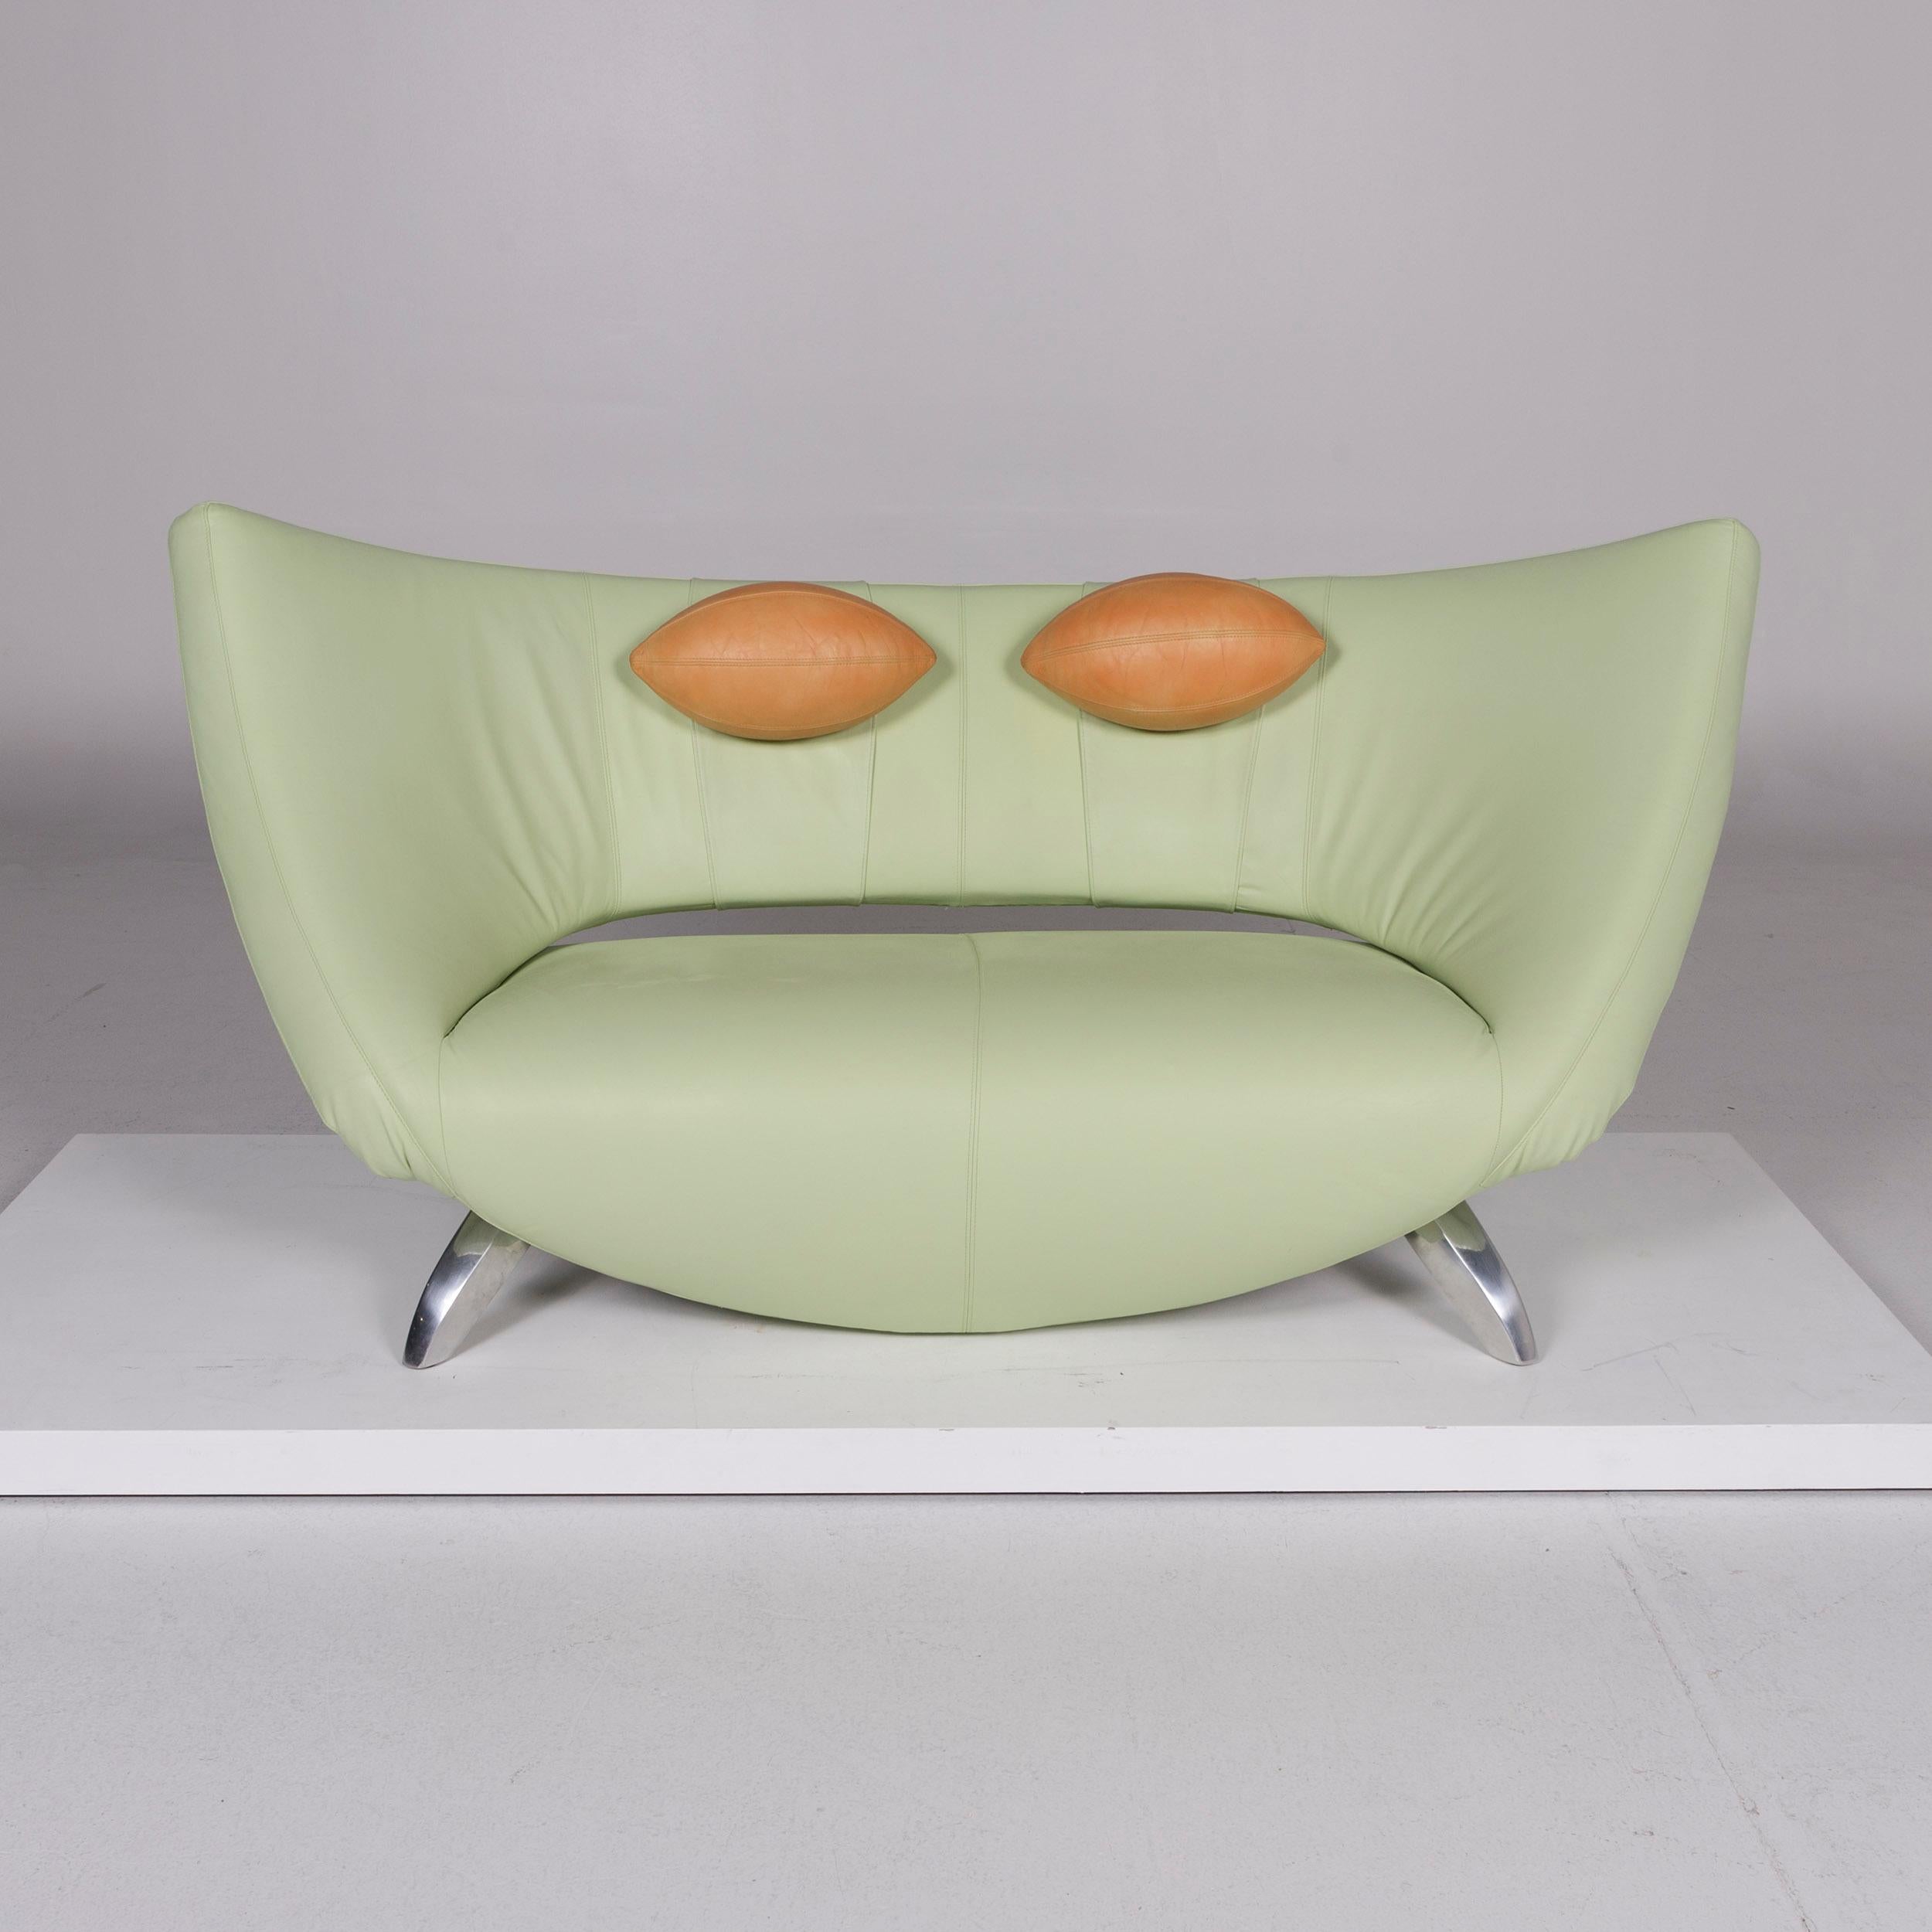 Contemporary Leolux Danaide Leather Sofa Green Pistachio Green Electric Function Couch